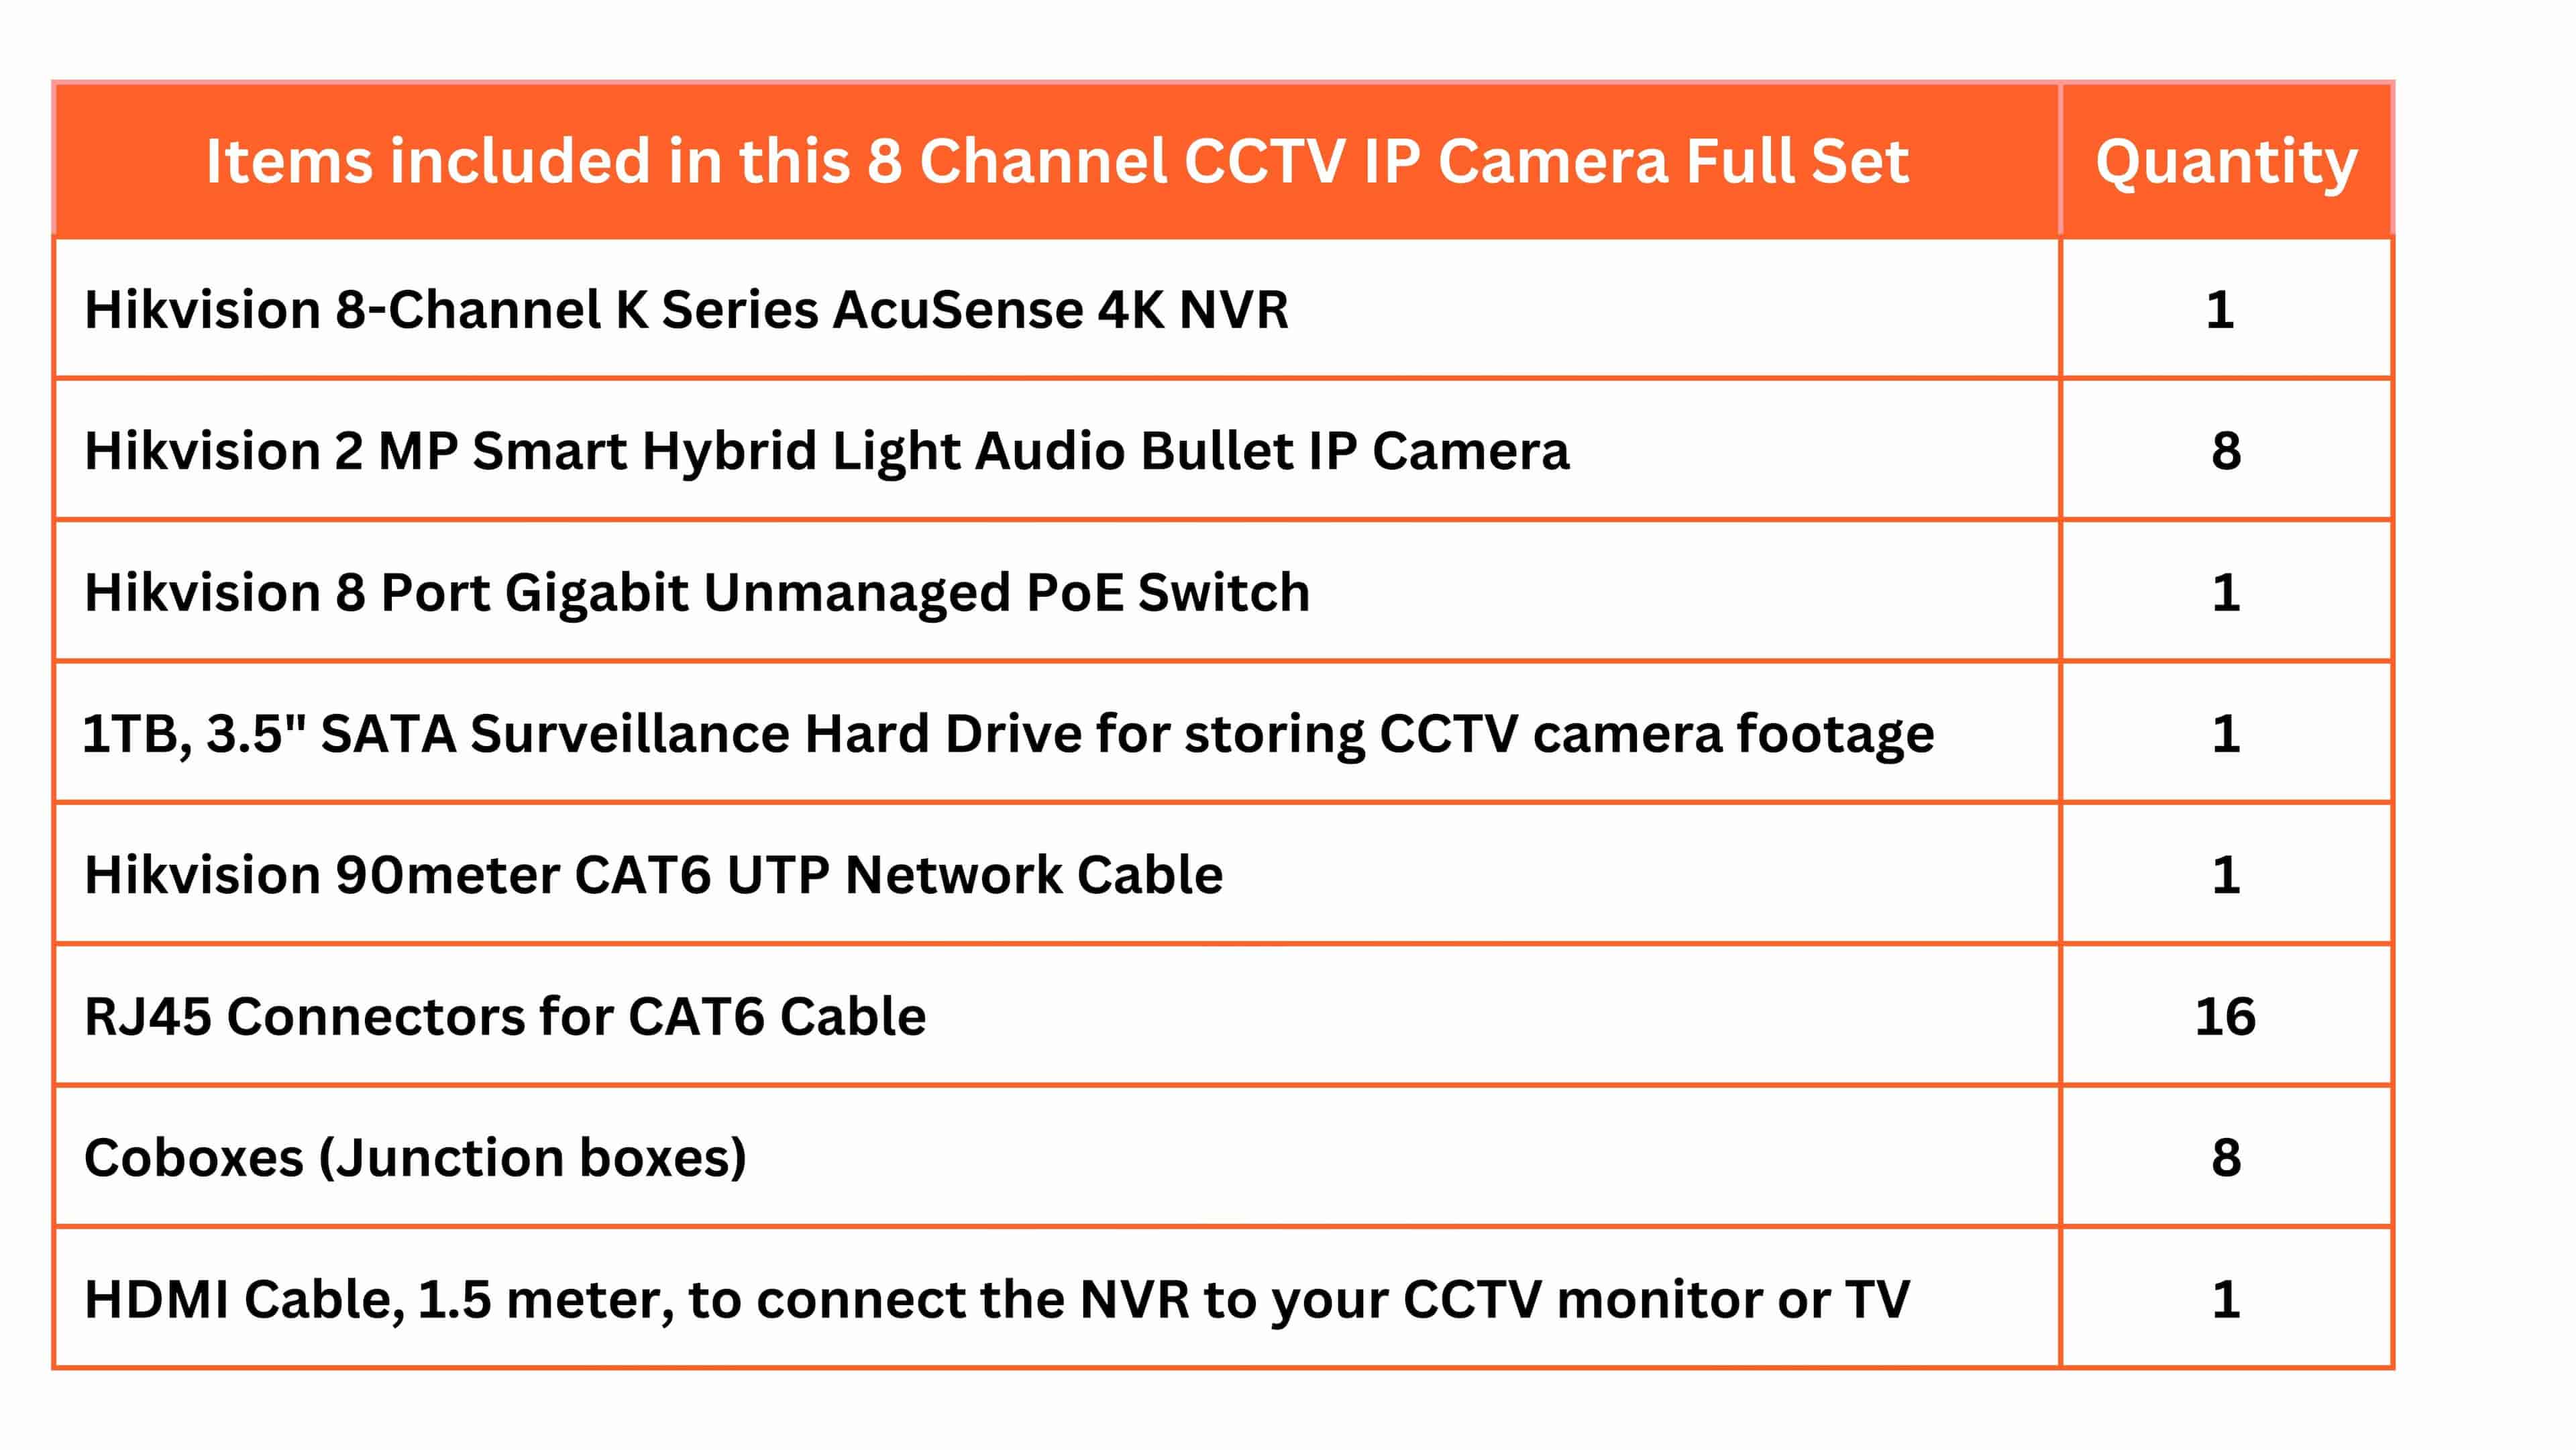 HIKVISION 8 CCTV IP Camera Full Set with 8 Channel 4K NVR, 8 × 2MP Hybrid IP Cameras, 8 Port PoE Switch, 1TB HDD, RJ45, Cobox, Cat6 90m & HDMI Cables